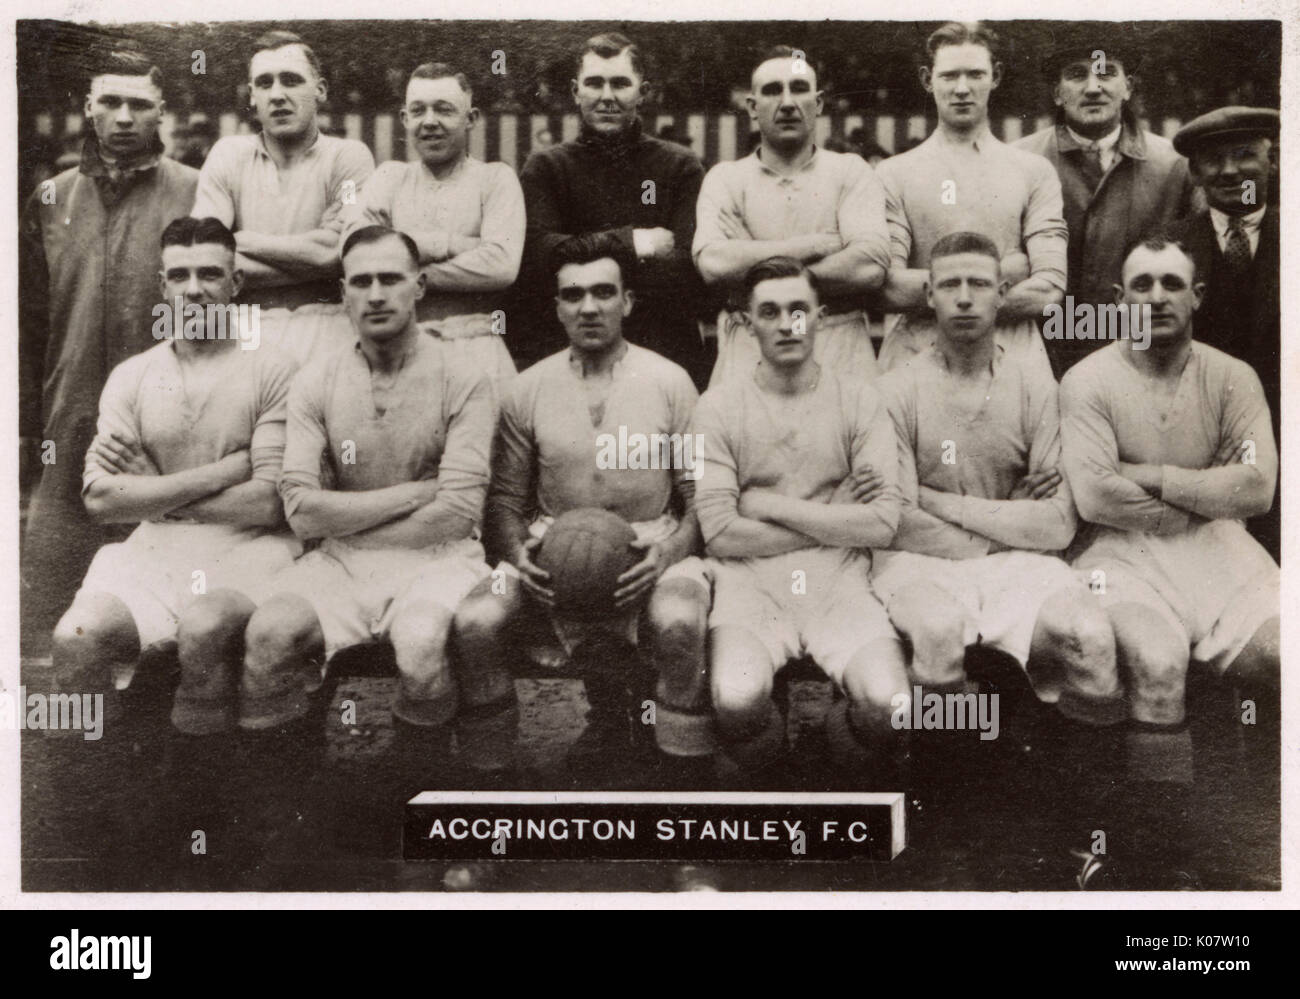 Accrington Stanley FC football team 1936. Back row: Kerr, Robinson, Wilson, Gill, Ivill, Treanor, Hacking (Manager), Brennand (Trainer).  Front row: Reynolds, Brown, Lapham, Green, McCulloch (Captain), Mee.     Date: 1936 Stock Photo